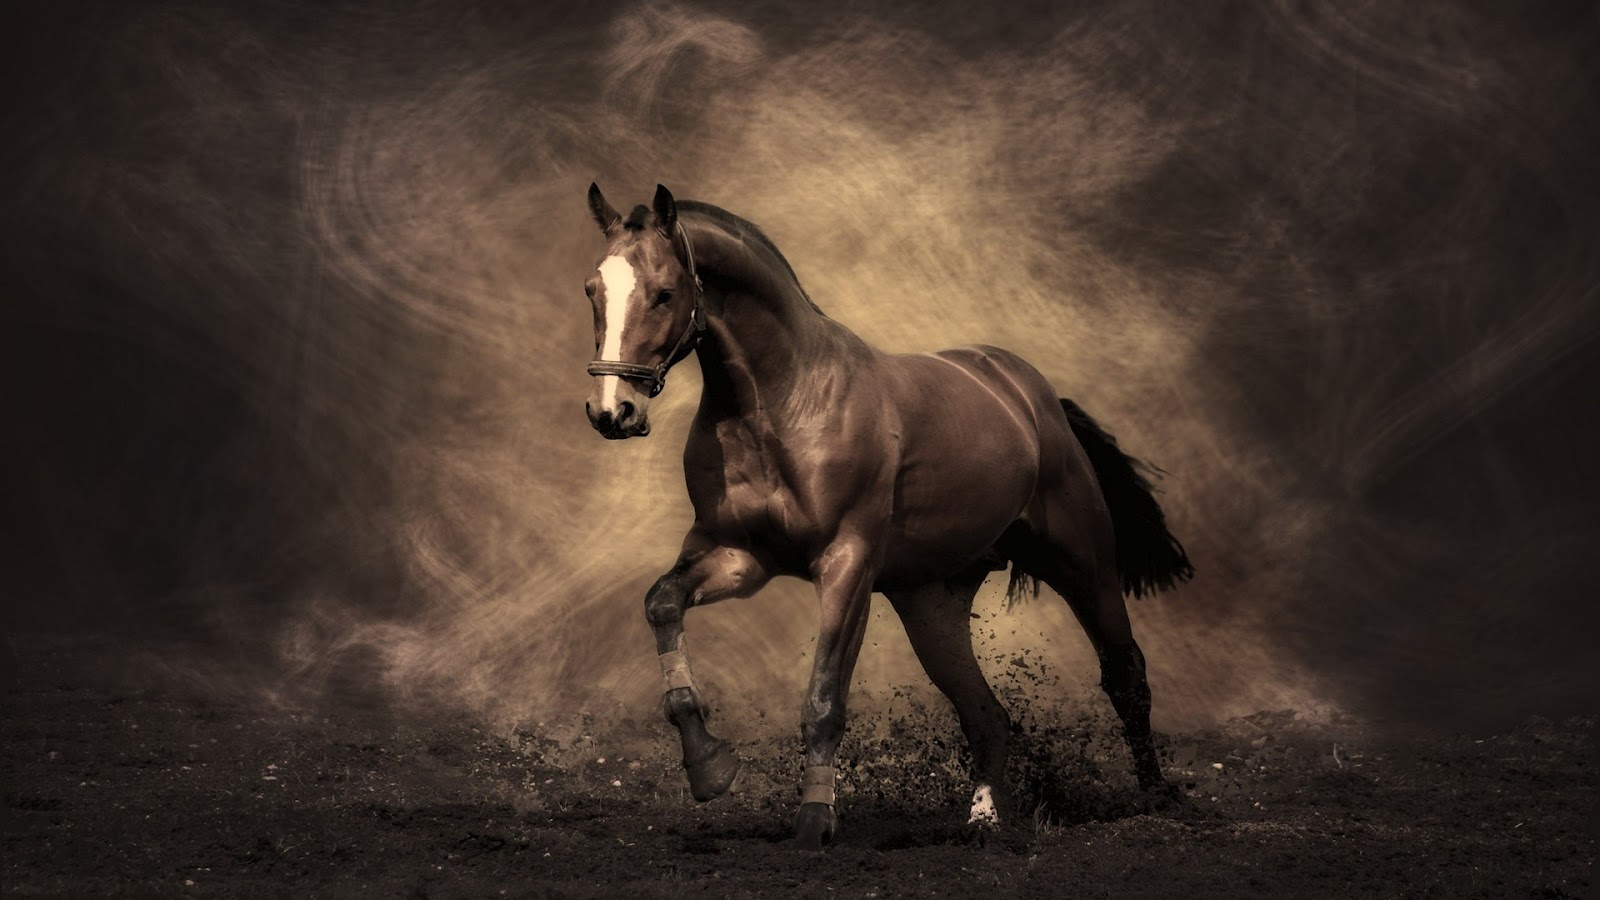 HD Horse High resolution wallpapers 1920x1080 PIXHOME